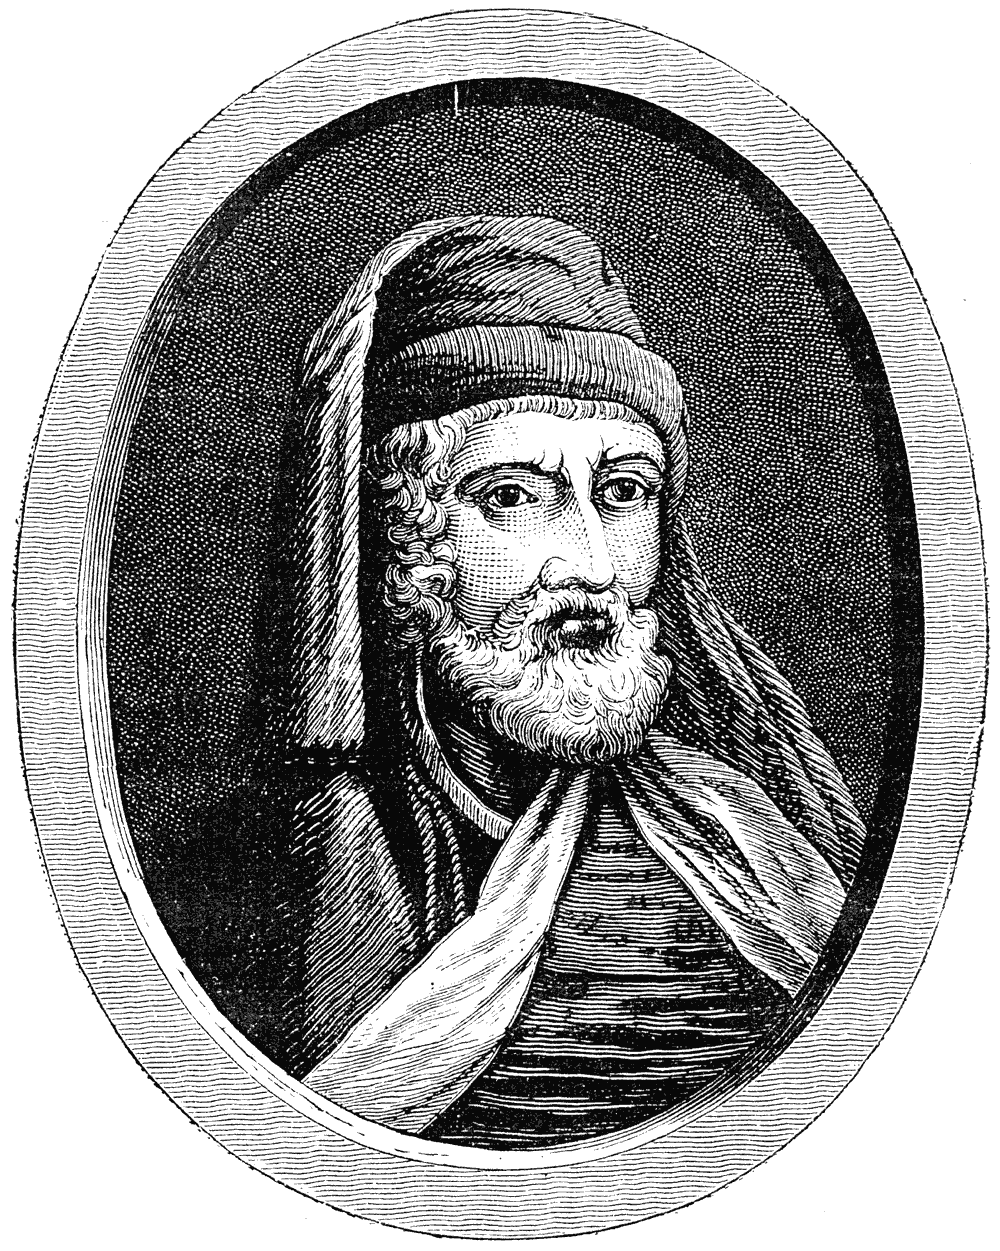 William Caxton, from Rev. J. Lewis' 'Life'. From Henri Bouchot 'The Printed Book' (1887), page 94, published size in Bouchot, 8.35cm wide by 10.65cm high.